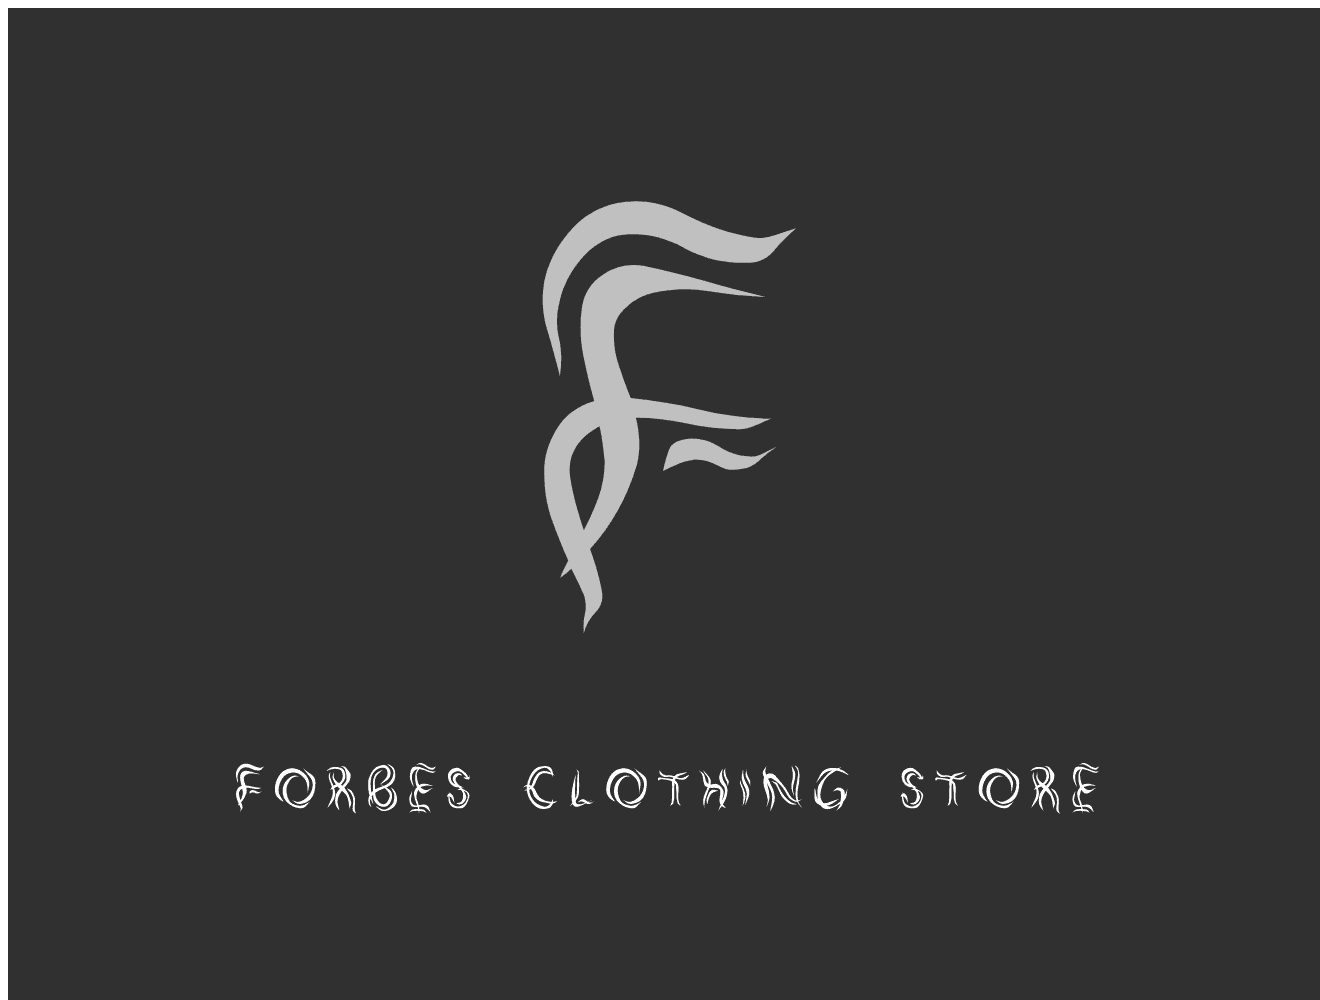 Forbes Clothing Store